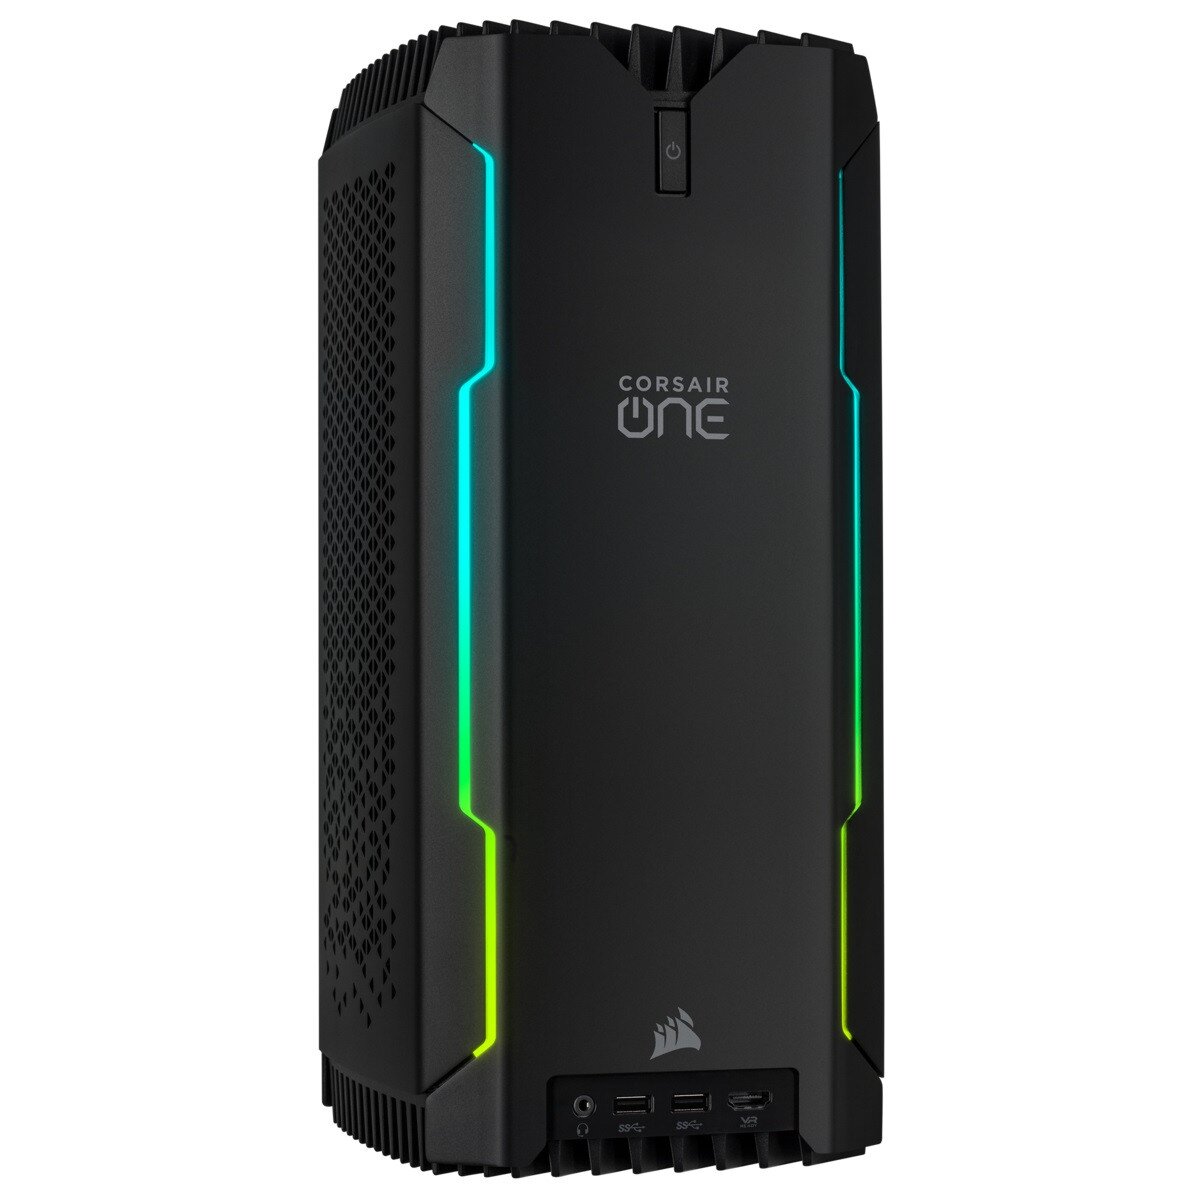 Dinkarville Vugge assistent Buy Corsair ONE Compact RTX Gaming PC - ONE i165 - i9-9900K/RTX 2080  Ti/32GB DDR4/960GB M.2 SSD/2TB HDD/Win 10 Pro online Worldwide - Tejar.com